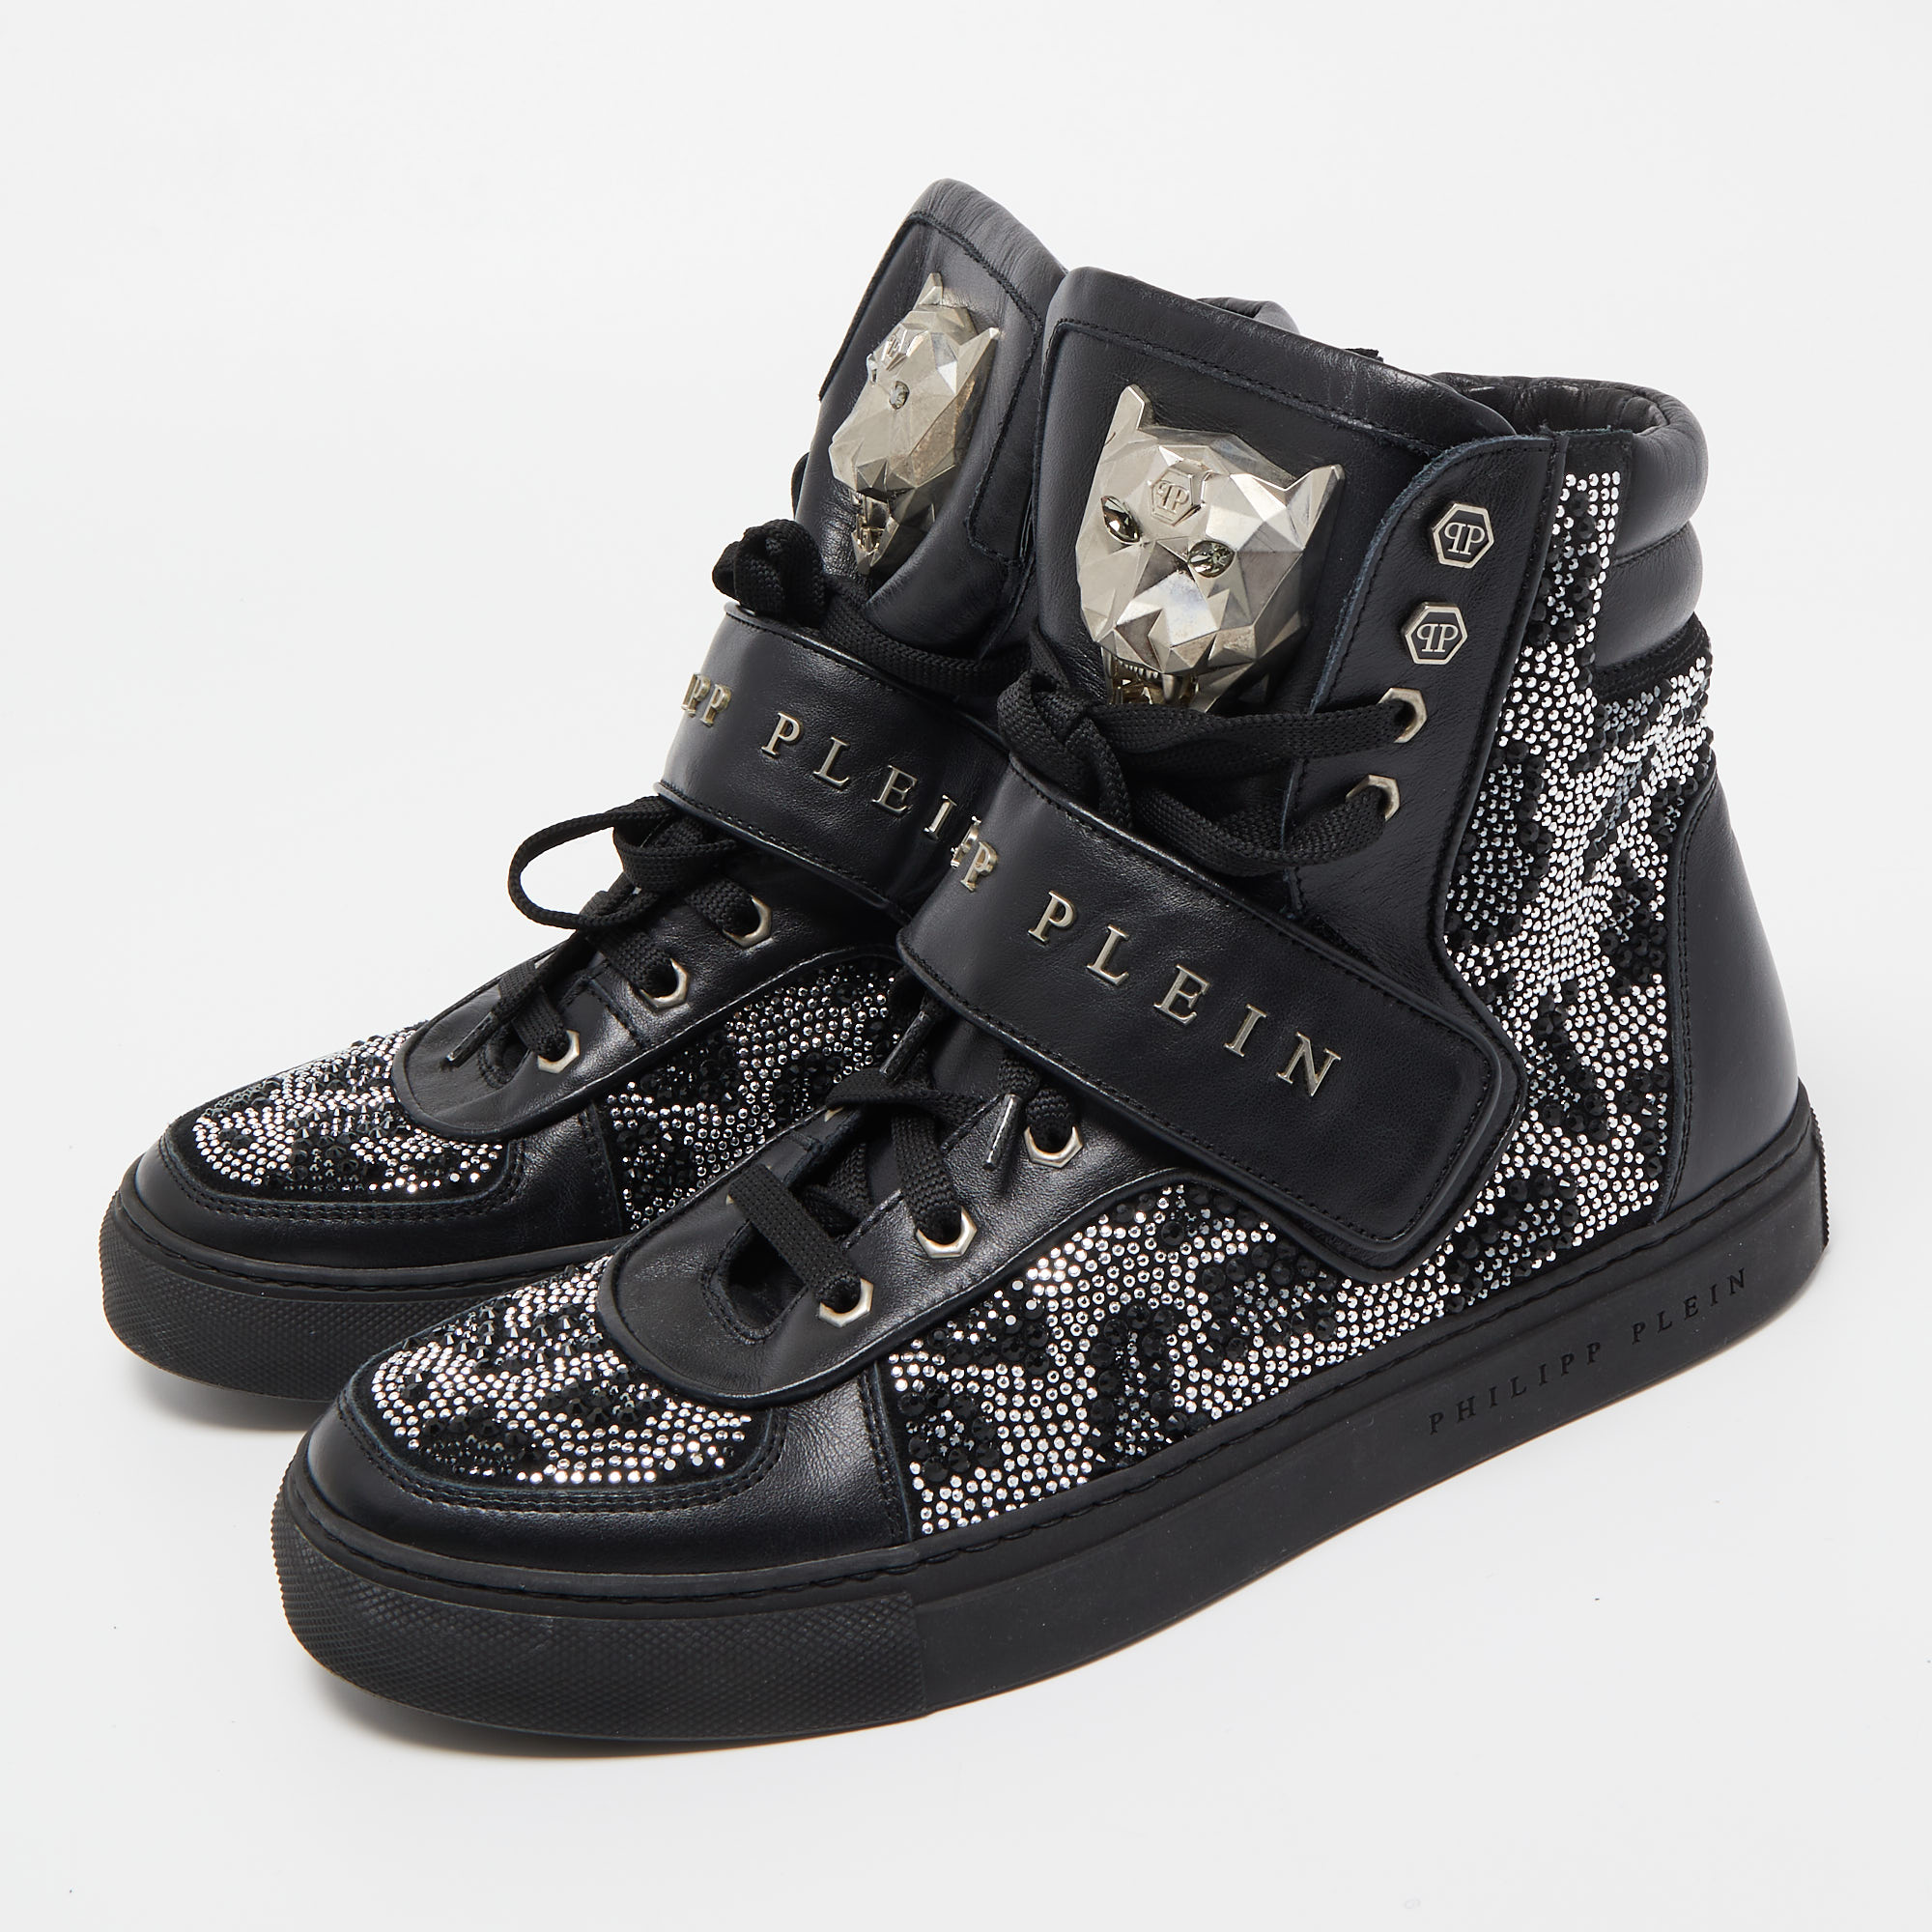 

Philipp Plein Black Leather Crystal Embellished High Top Sneakers Size